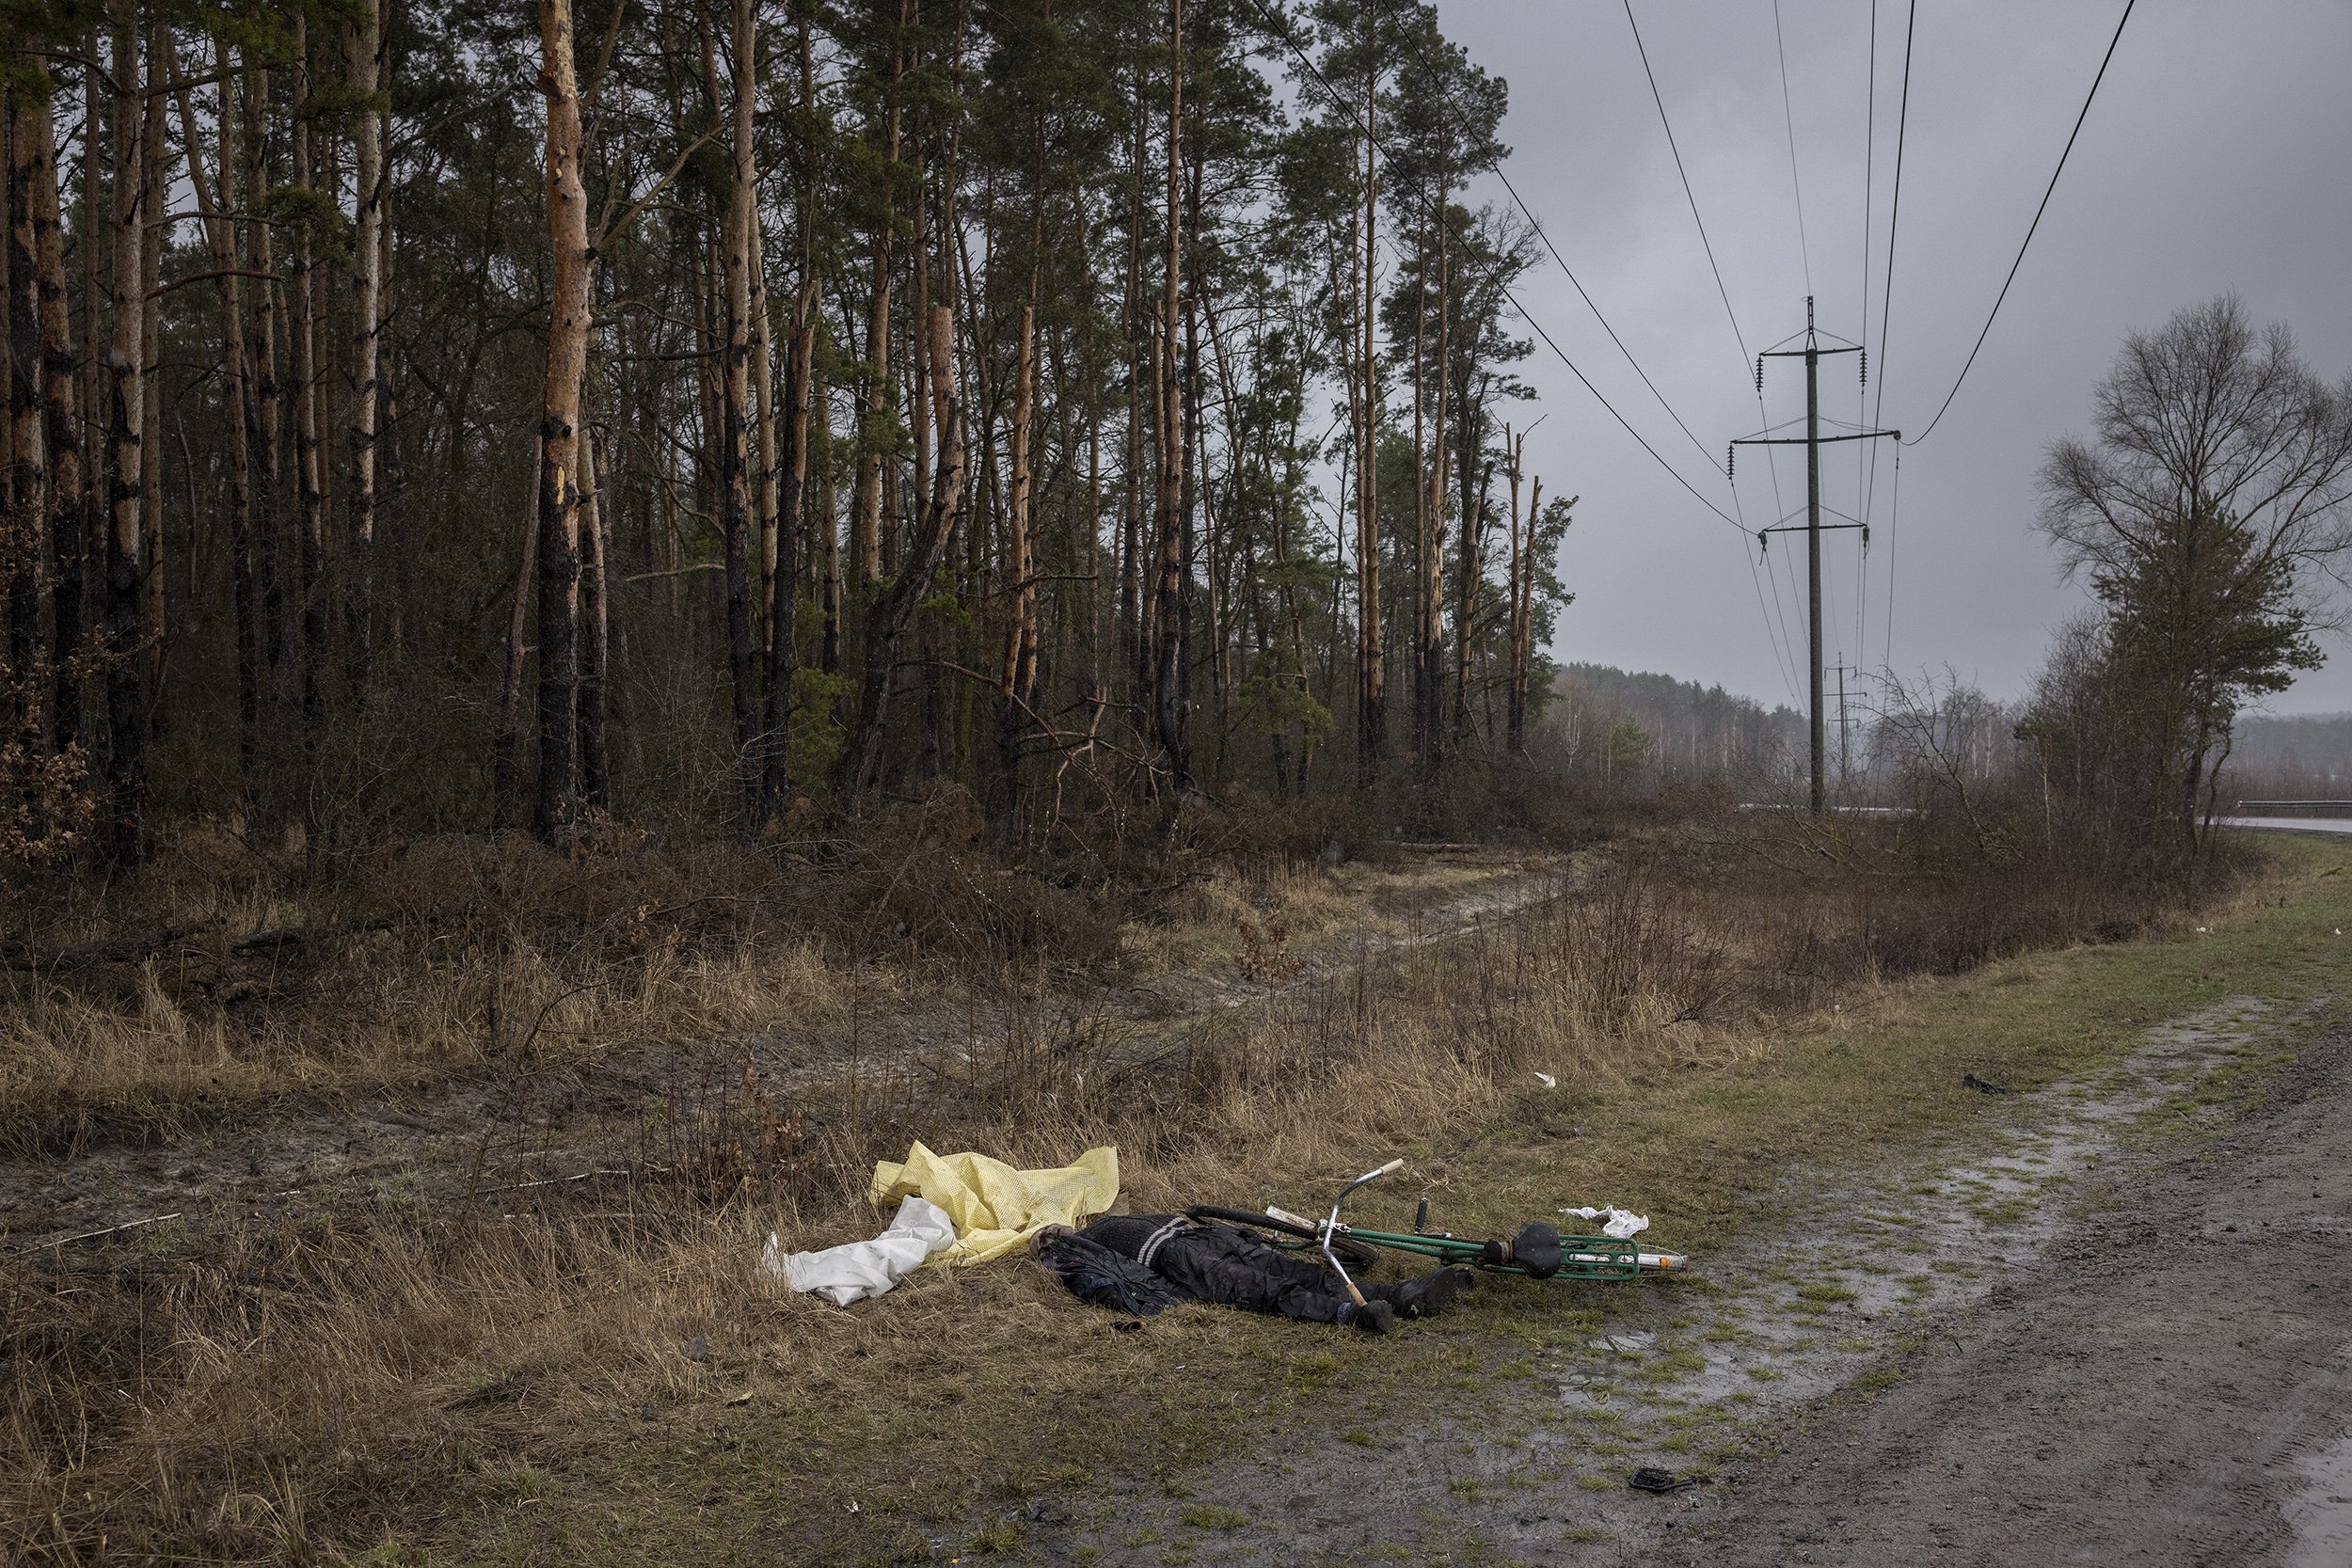  The body of a middle aged man, with a gunshot wound to the head, lay on the side of the road just outside the town of Bucha. Russian troops are thought to have killed hundreds of unarmed civilians during their month long occupation of the area. Apri